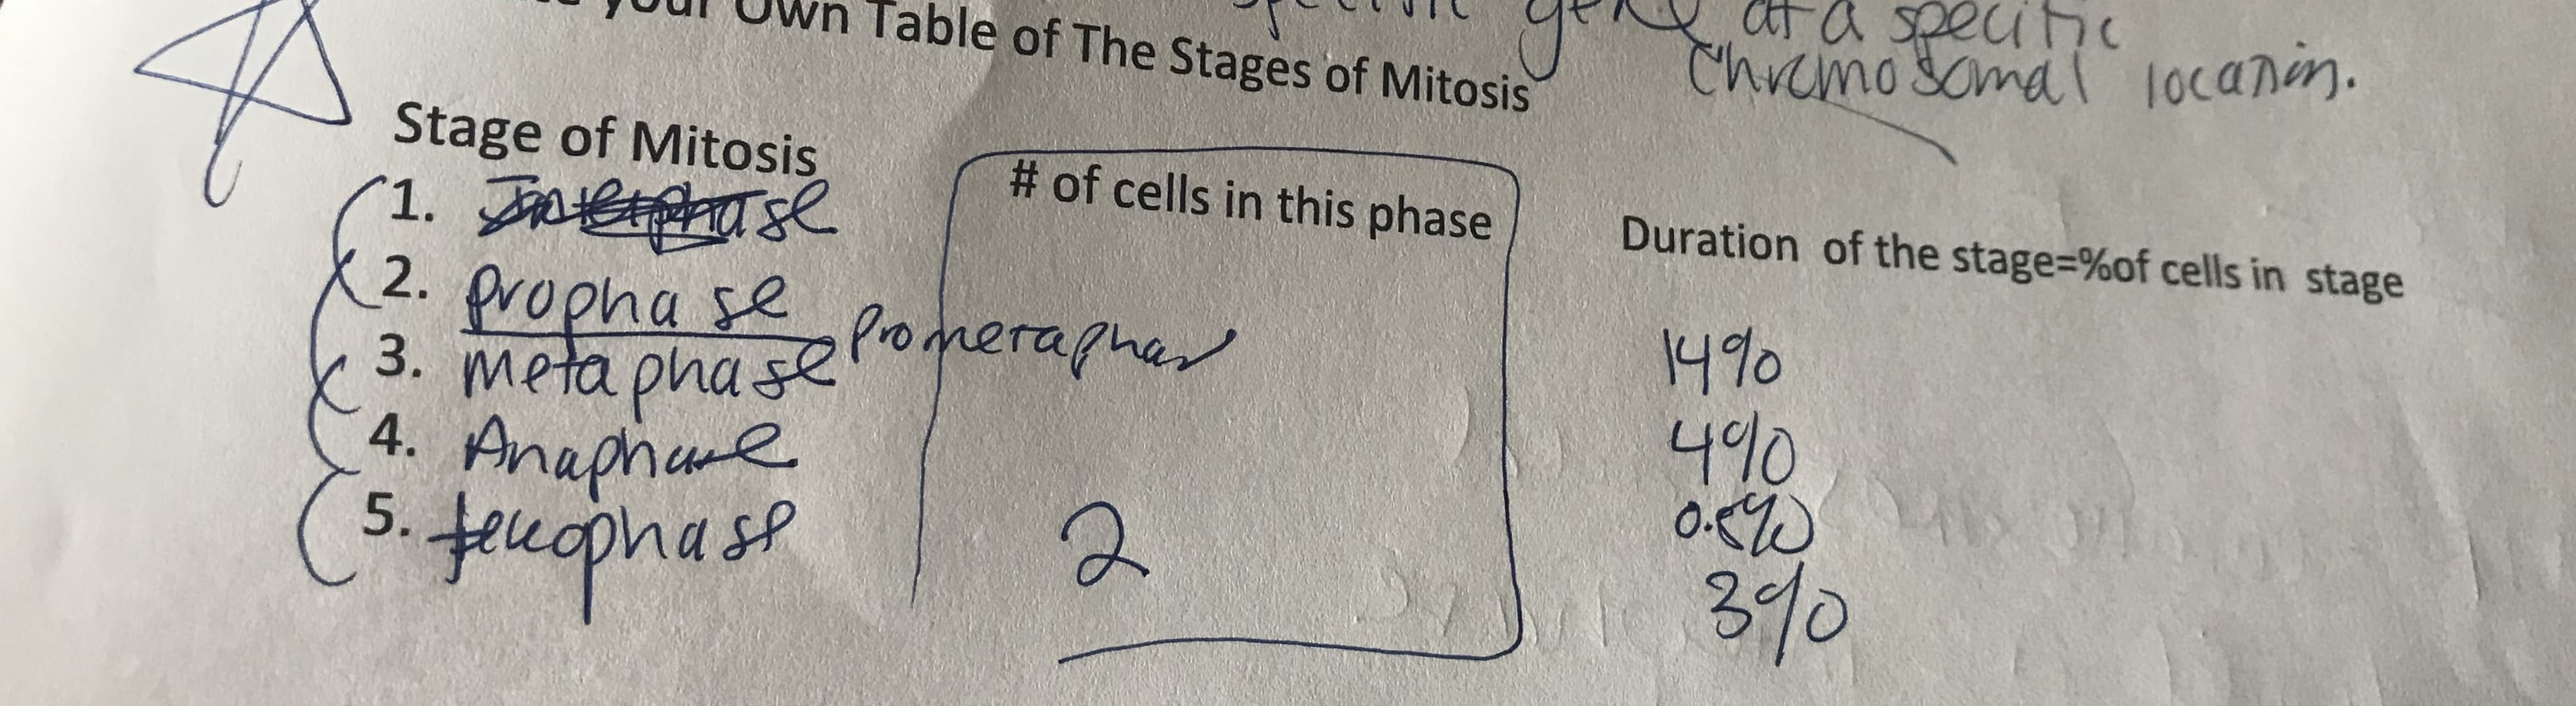 SIS
Stage of Mitosis
1. Fease
2. Qropha se pomeraph
# of cells in this phase
Duration of the stage=%of cells in stage
a
